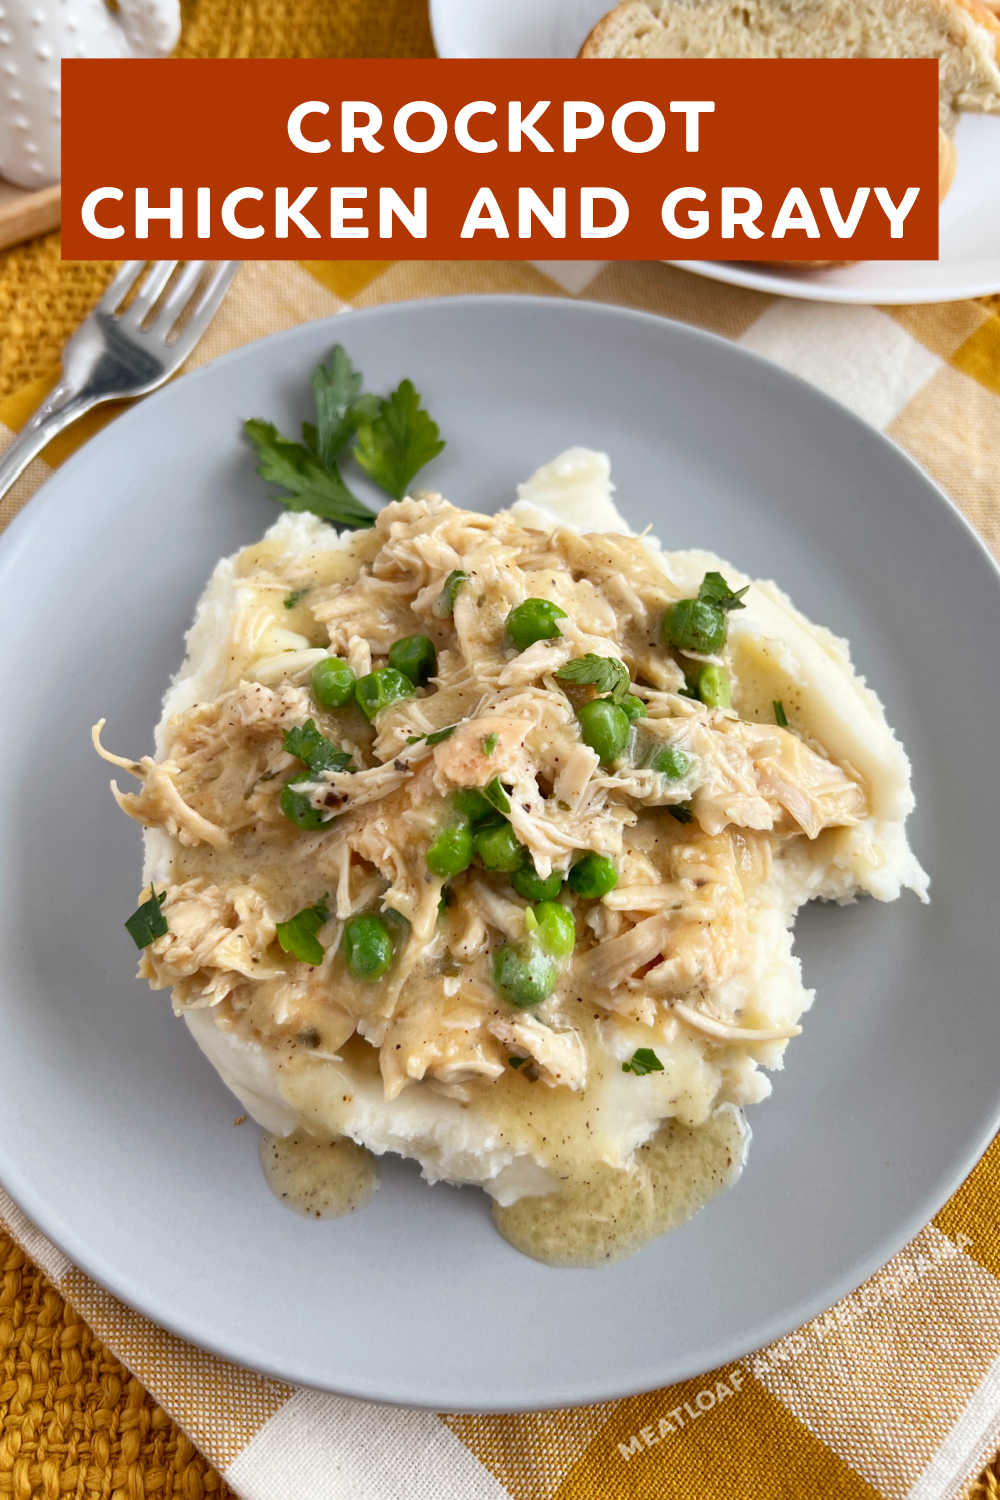 This Crockpot Chicken and Gravy recipe is a delicious slow cooker chicken dinner with tender chicken in creamy gravy. An easy recipe the whole family loves and pure comfort food! via @meamel